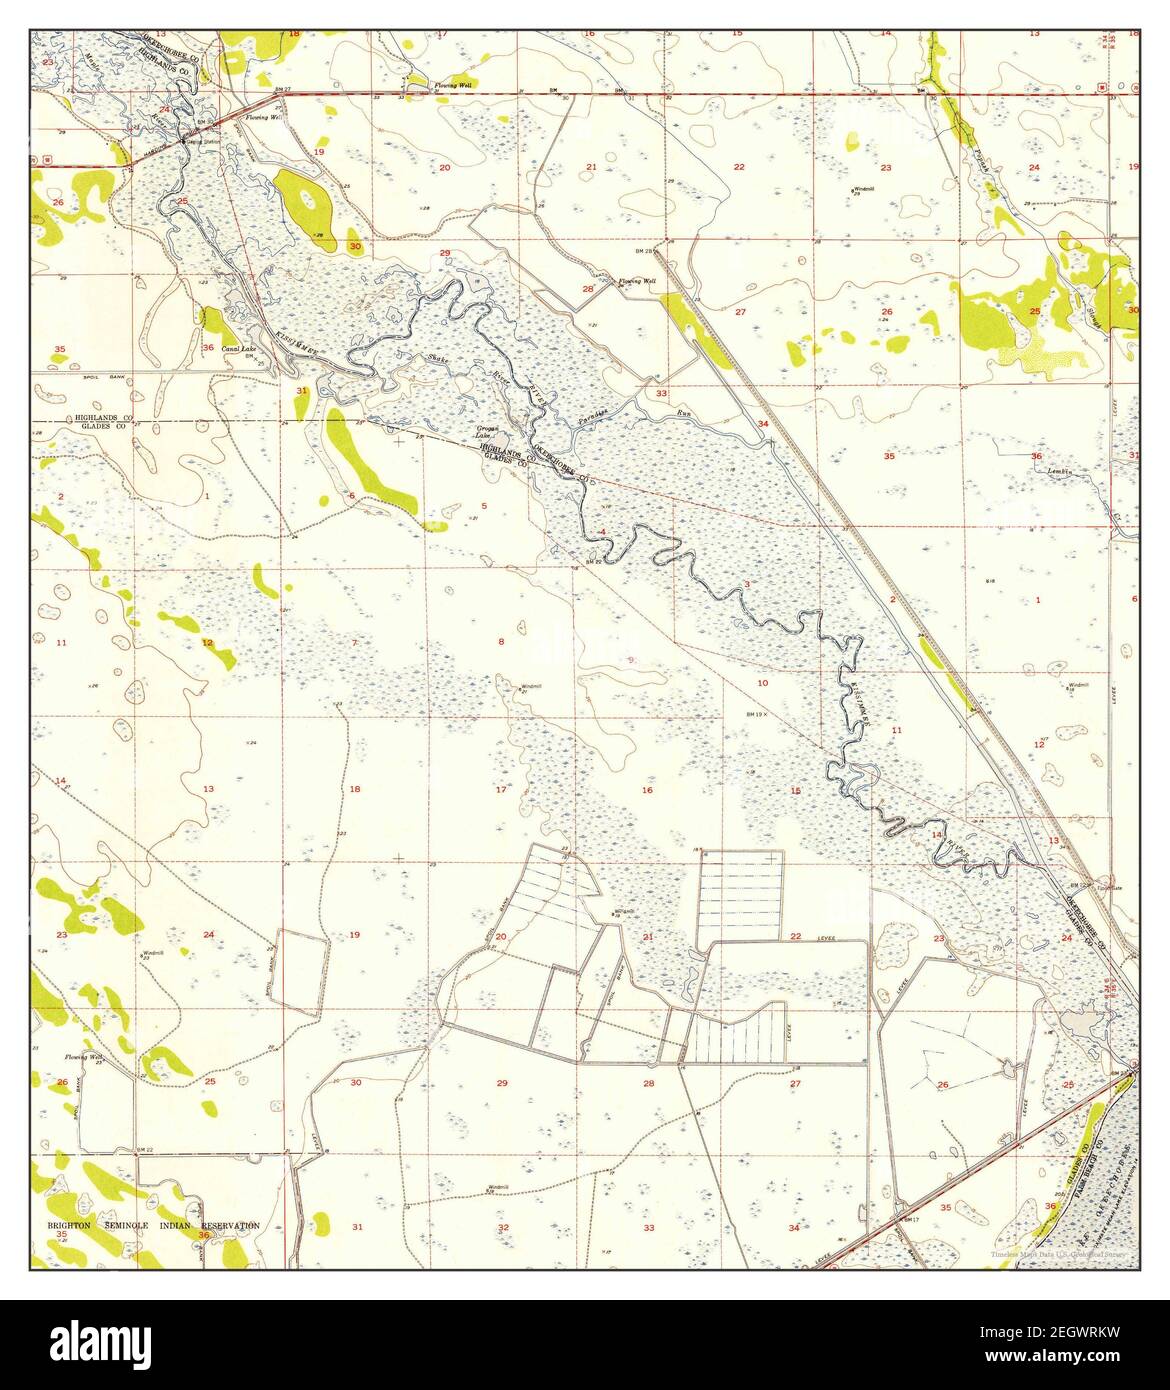 Okeechobee NW, Florida, map 1952, 1:24000, United States of America by Timeless Maps, data U.S. Geological Survey Stock Photo